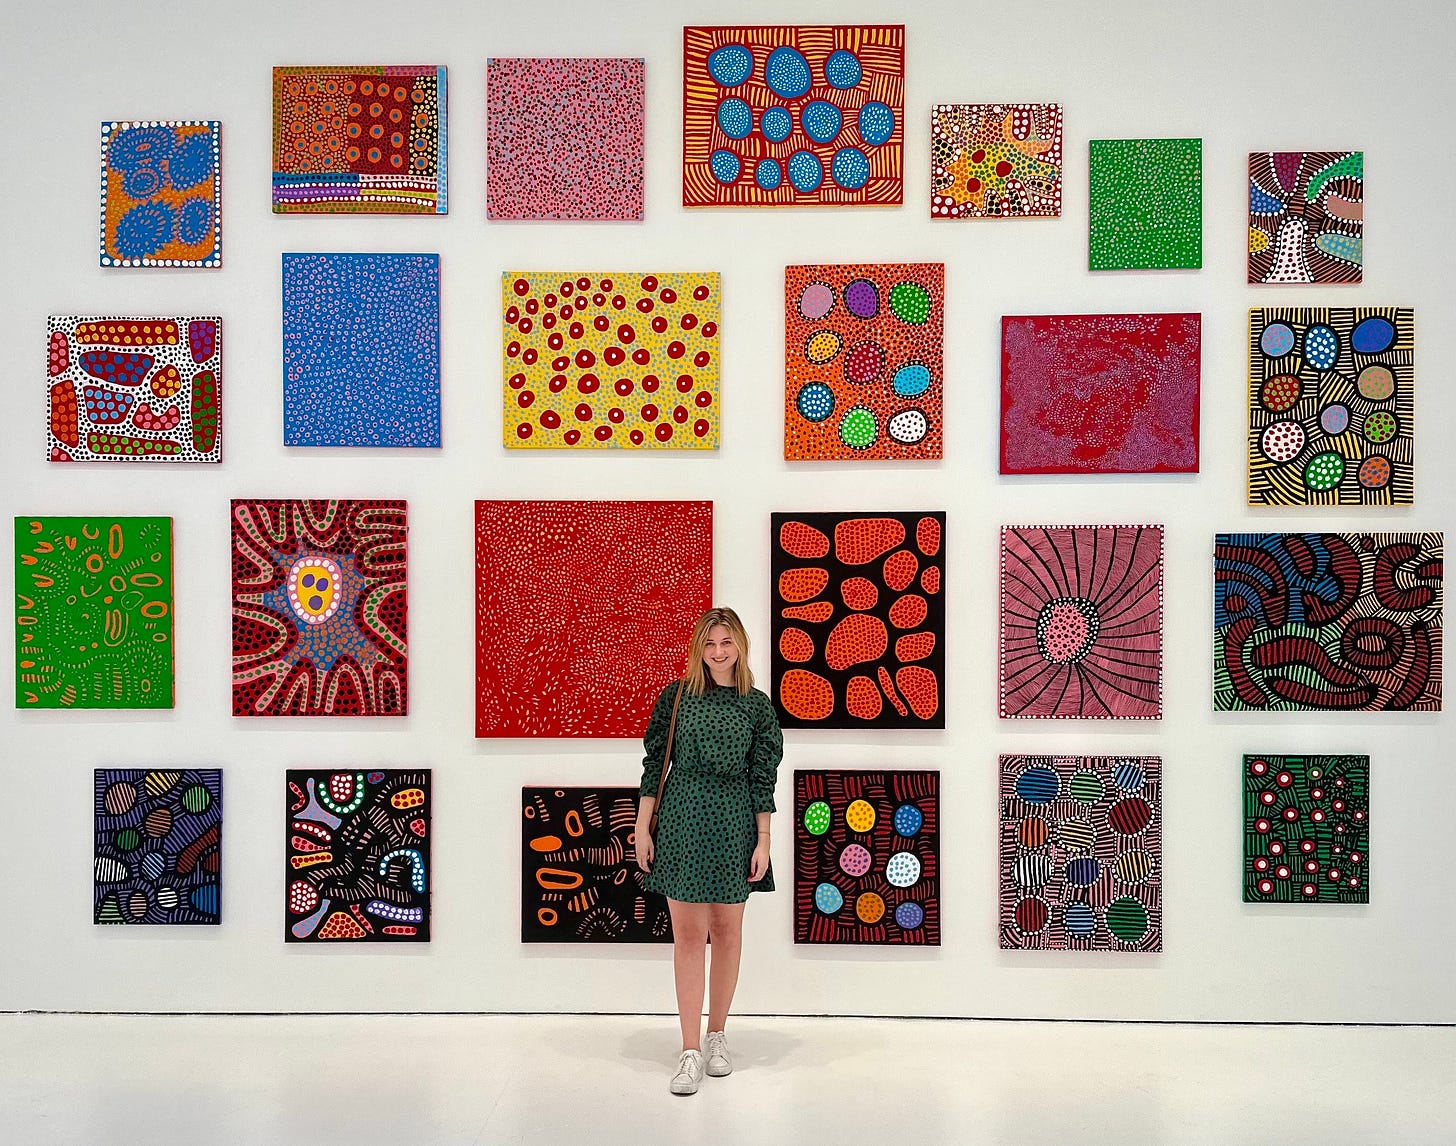 Casey Betts, Senior Social Media Manager at the Whitney Museum of American Art, standing in front of a wall of art